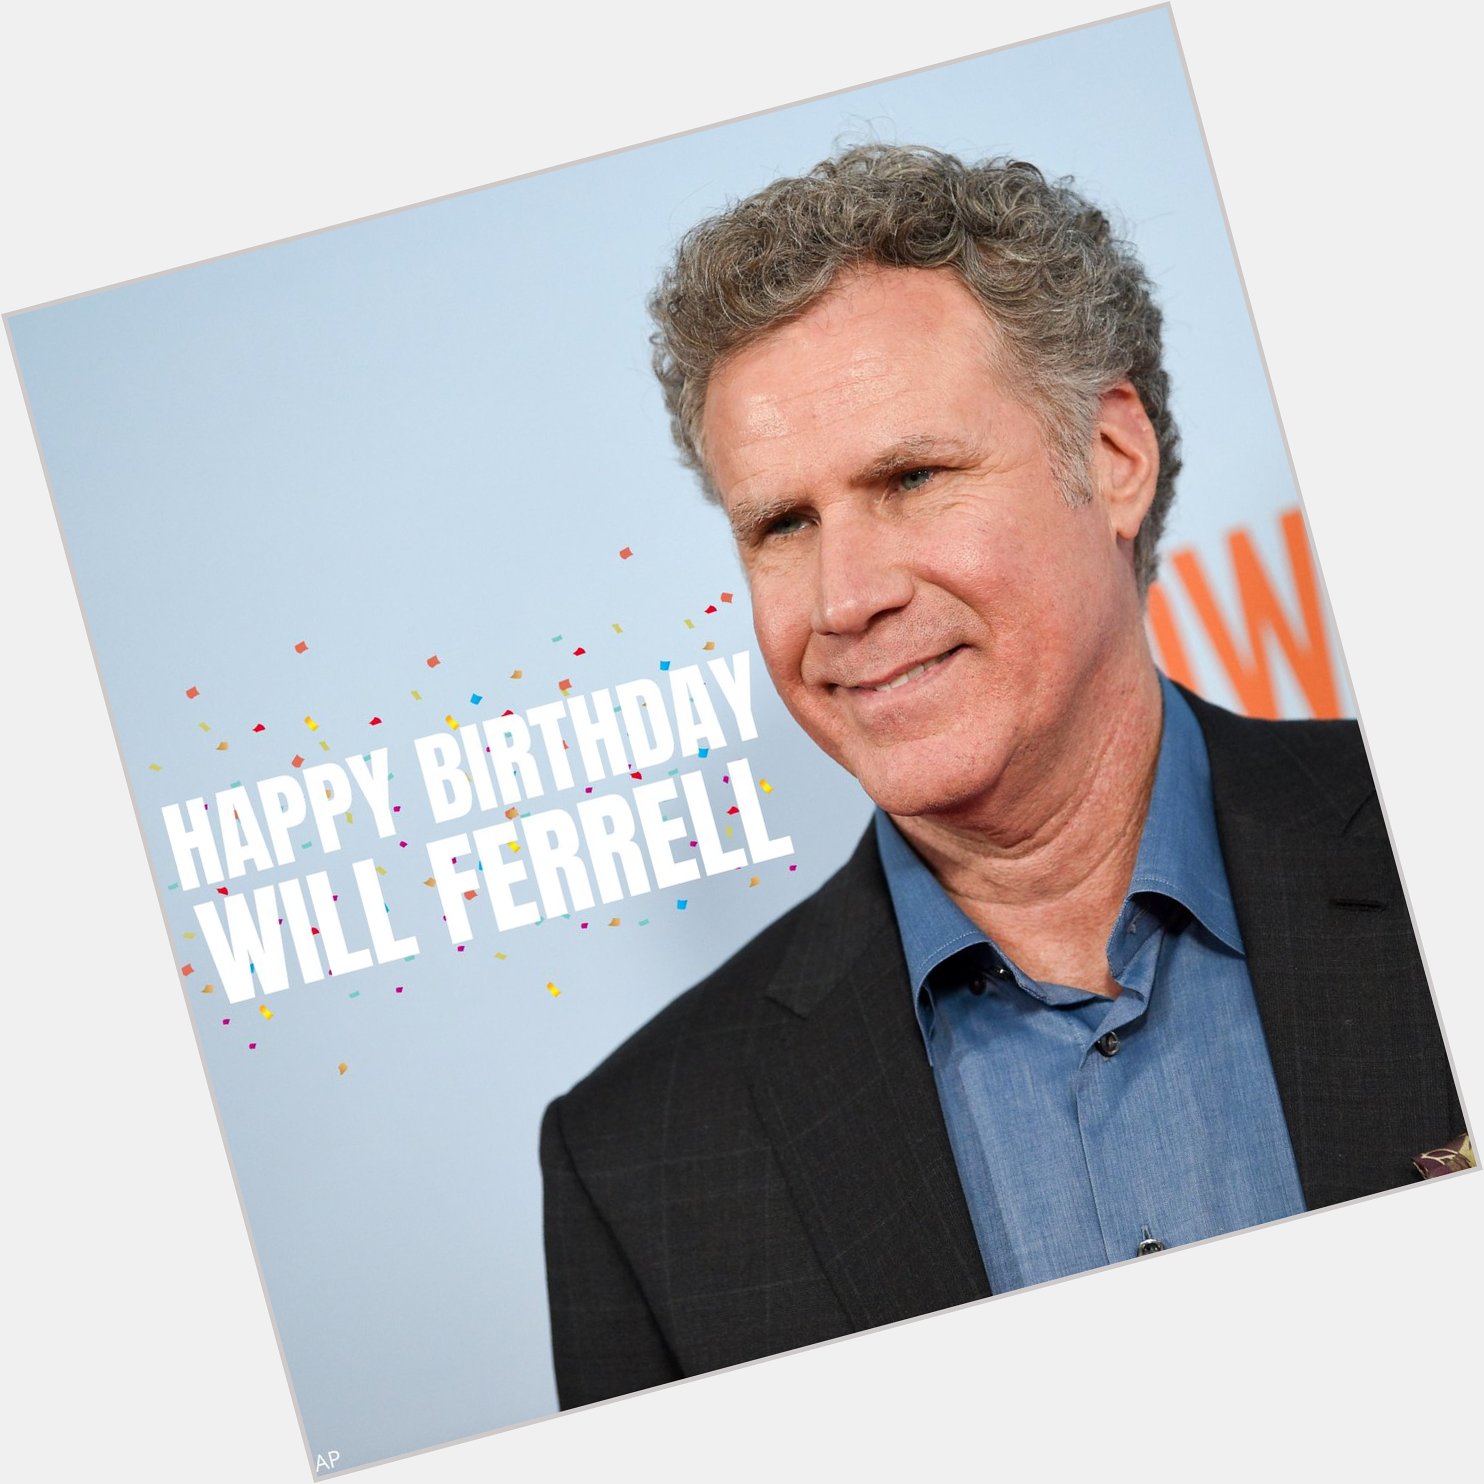 Happy birthday Will Ferrell! The comedic actor turned 53 today. What\s your favorite movie of his? 